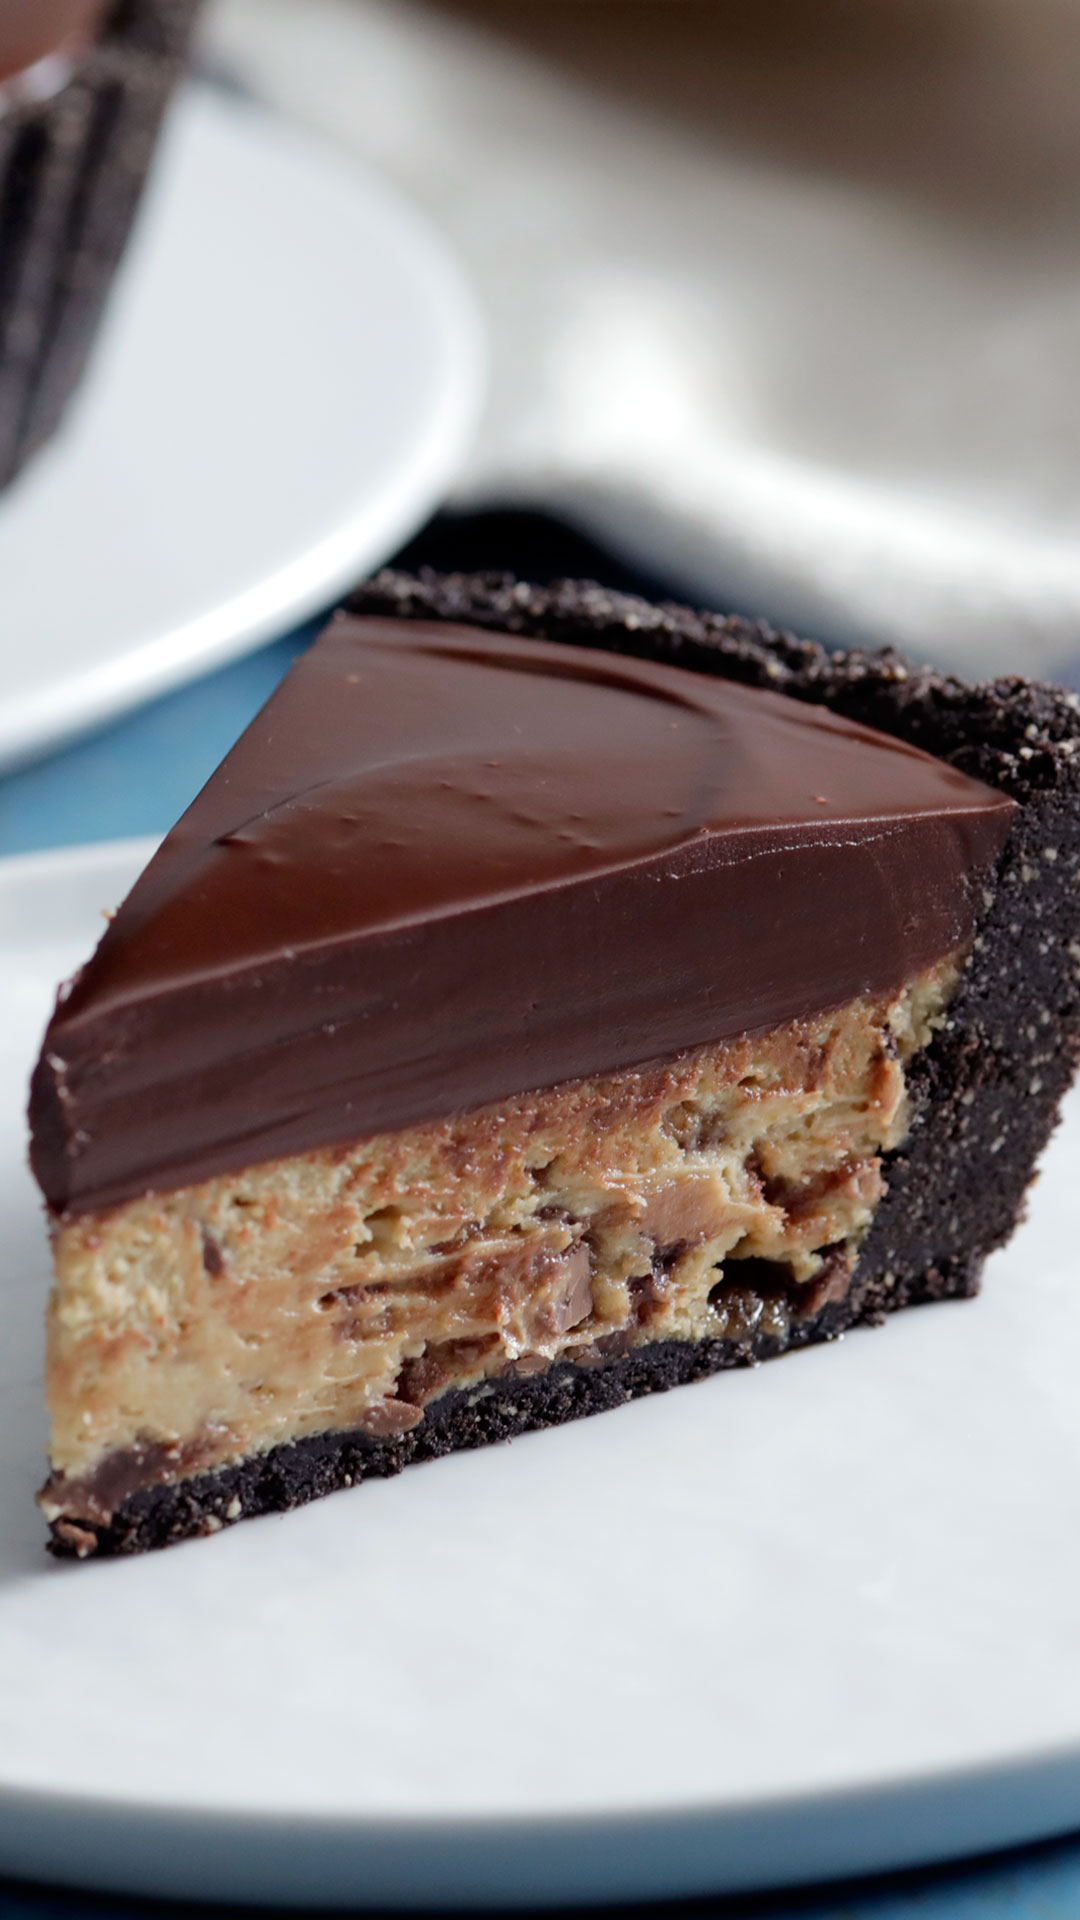 Giant Peanut Butter Cup Cheesecake